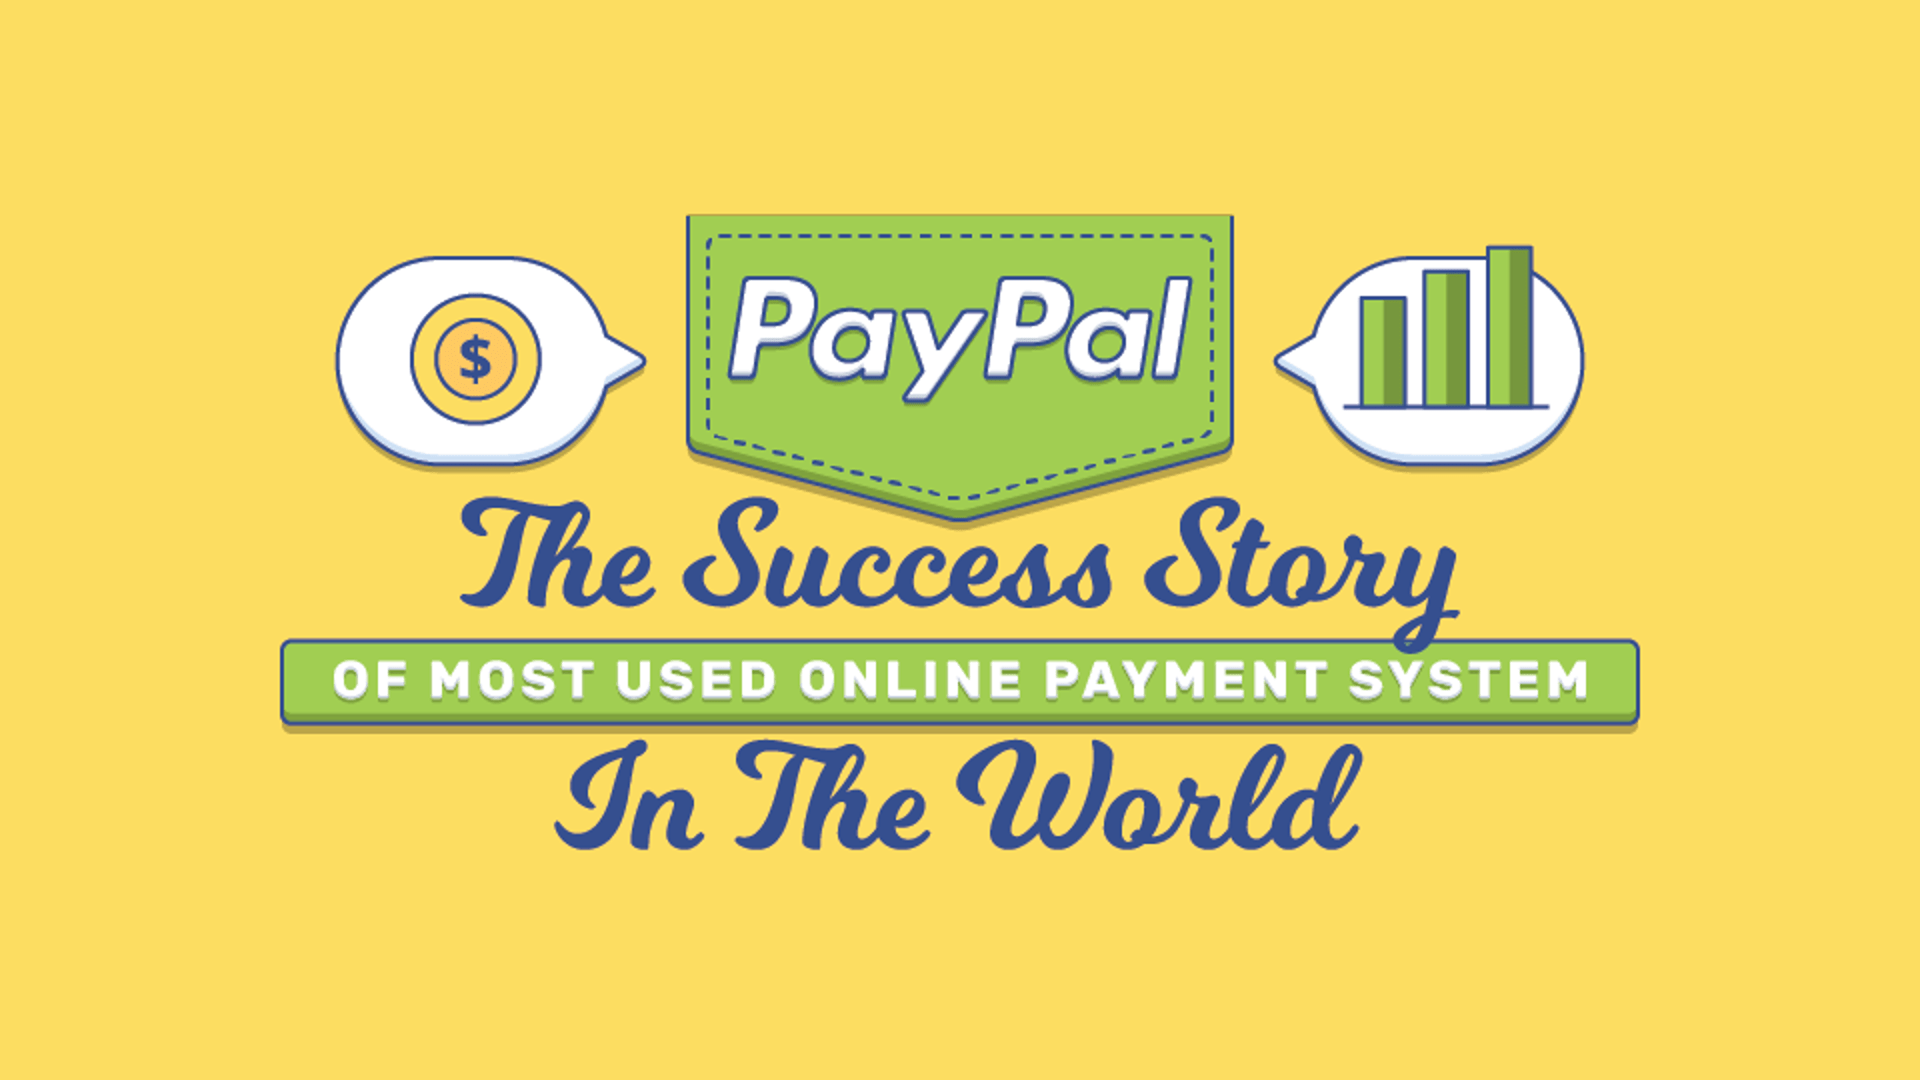 PayPal - The Success Story